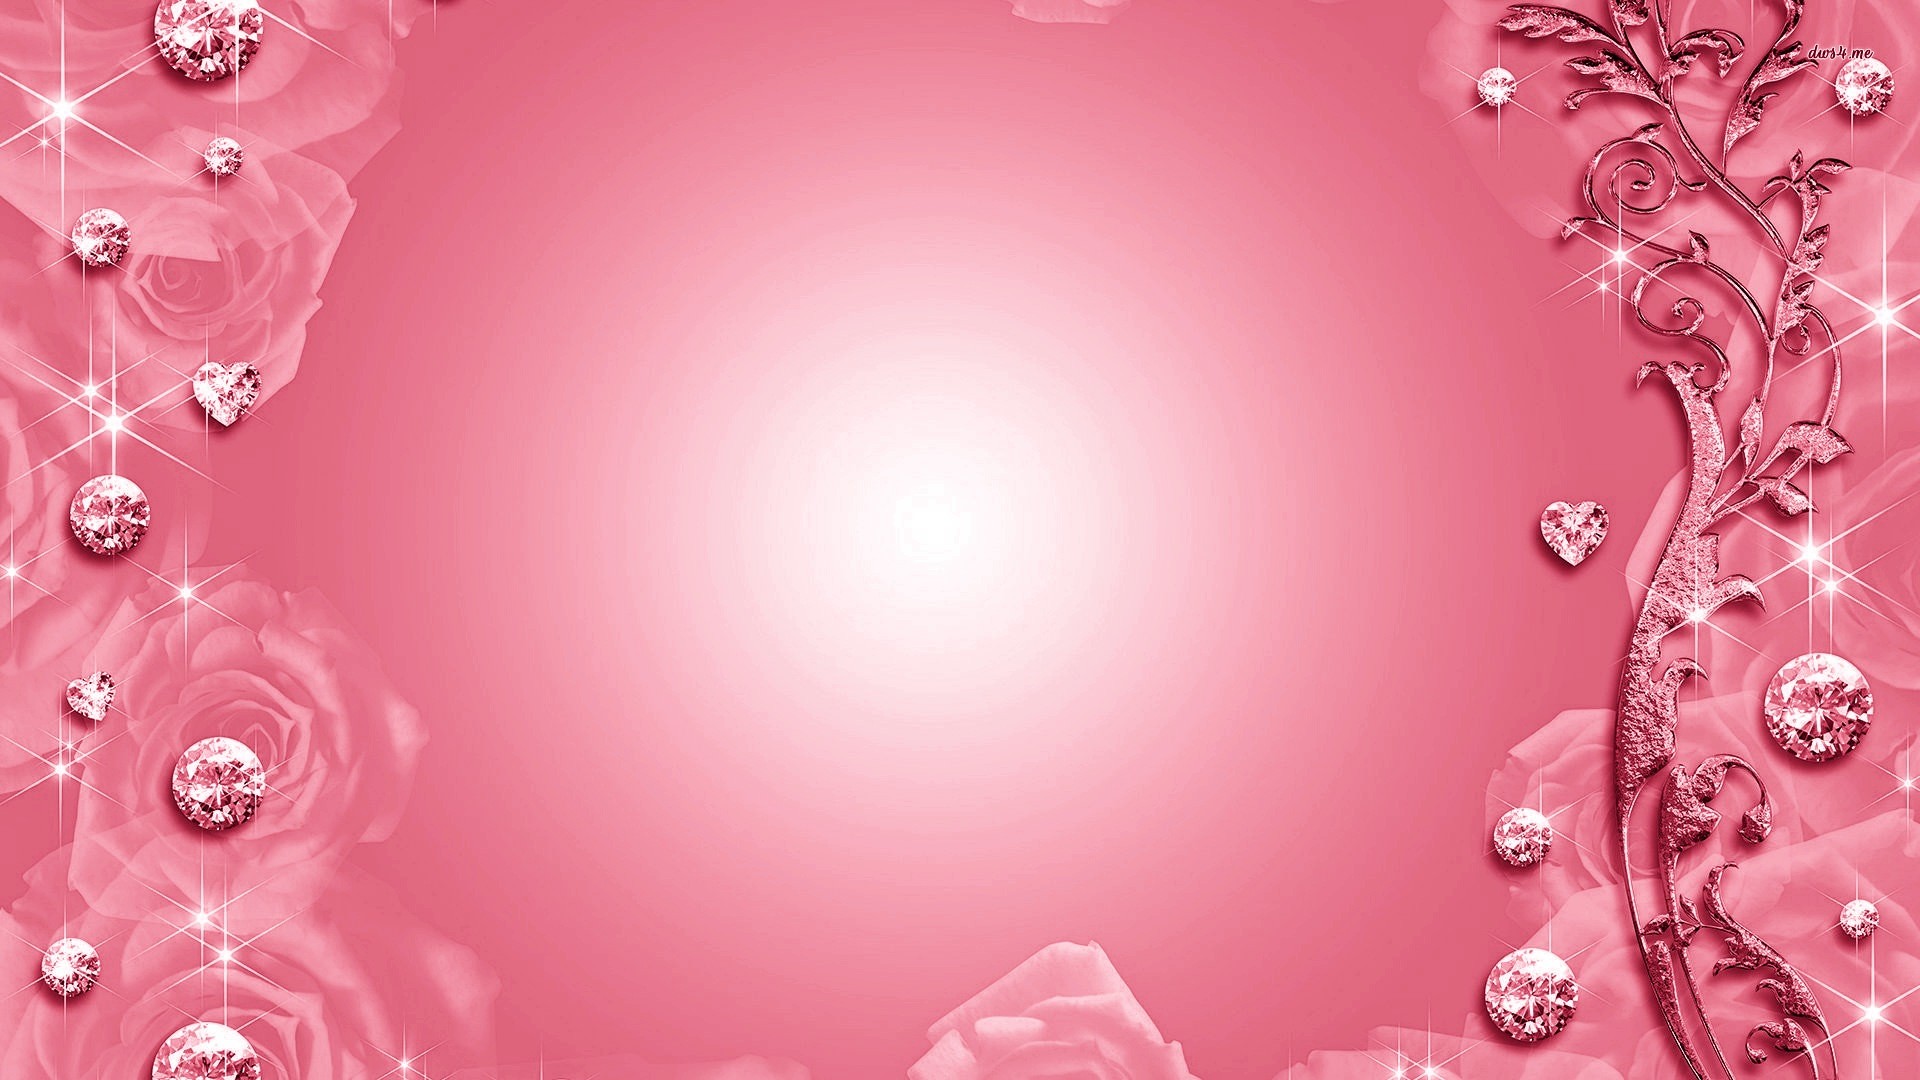 1920x1080 Download image Pink Diamond Desktop Wallpaper PC, Android, iPhone and .